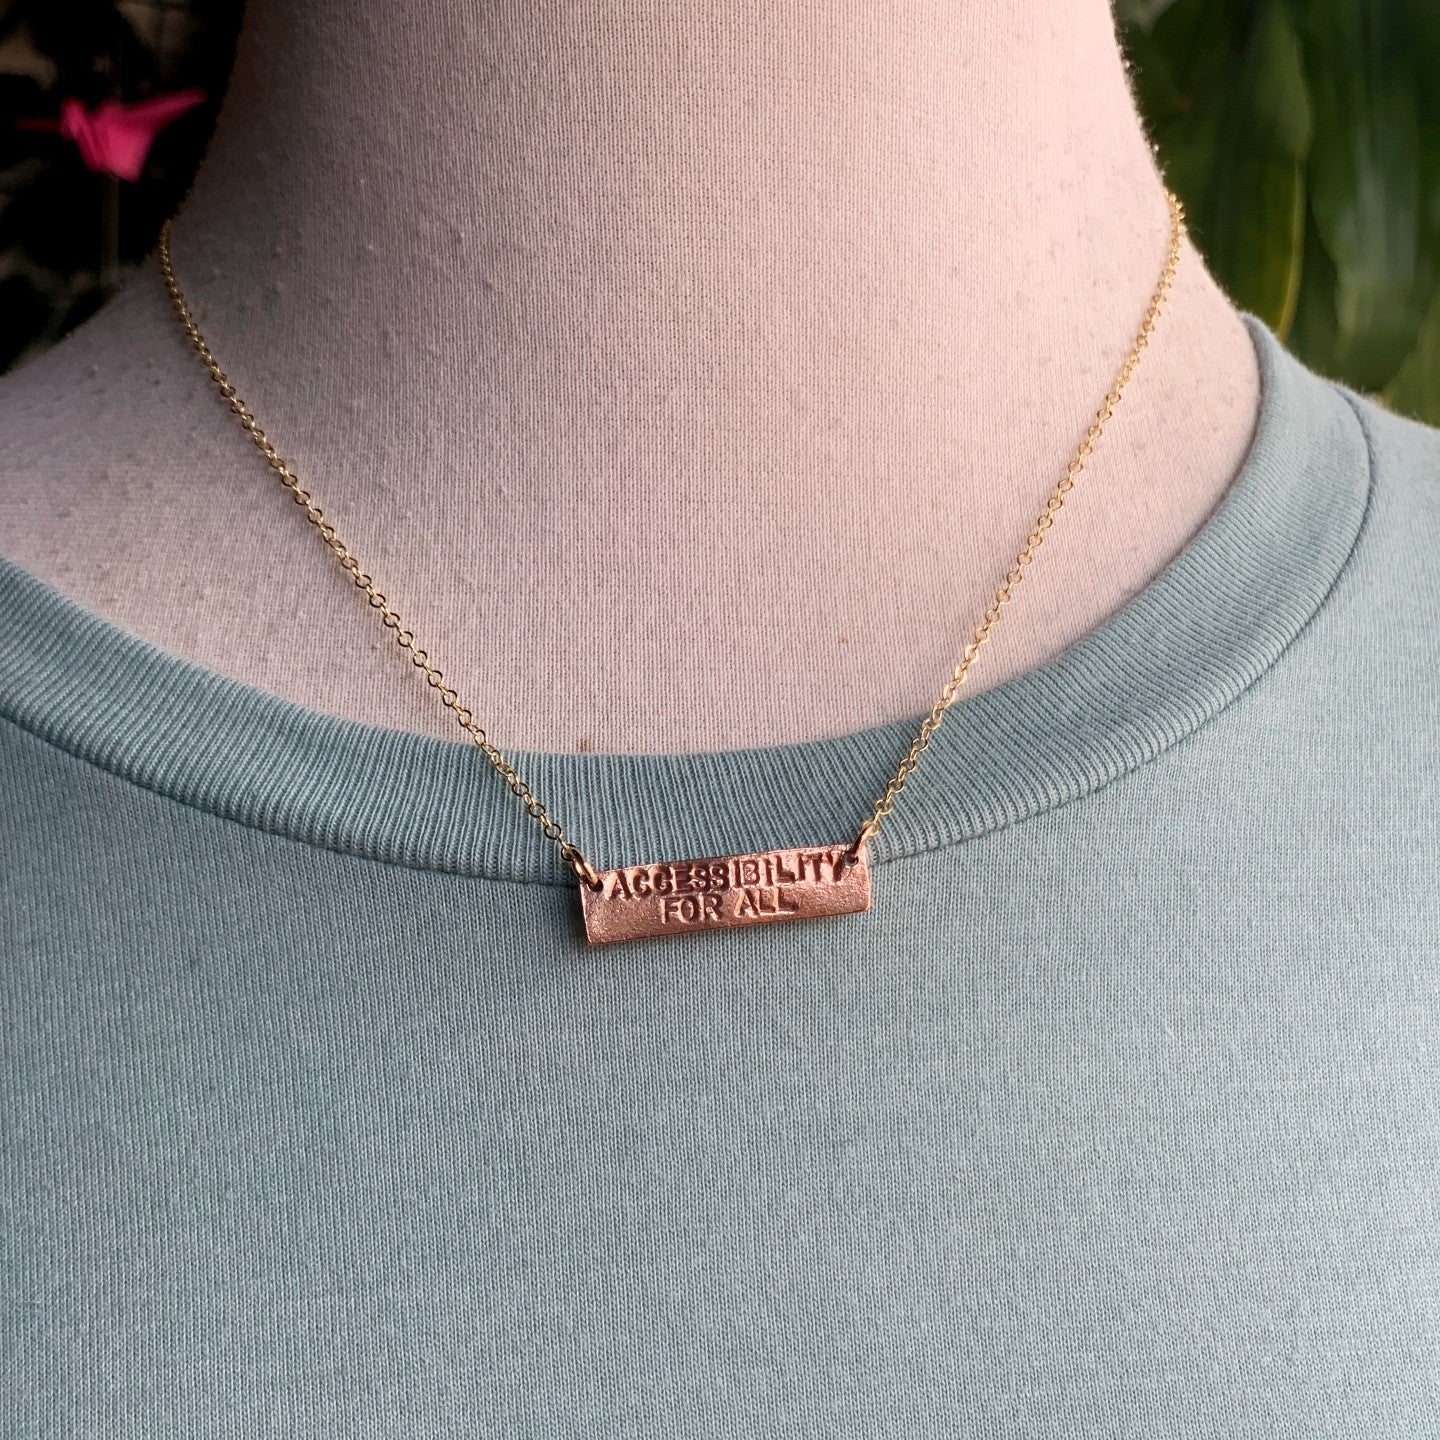 Accessibility for All necklace